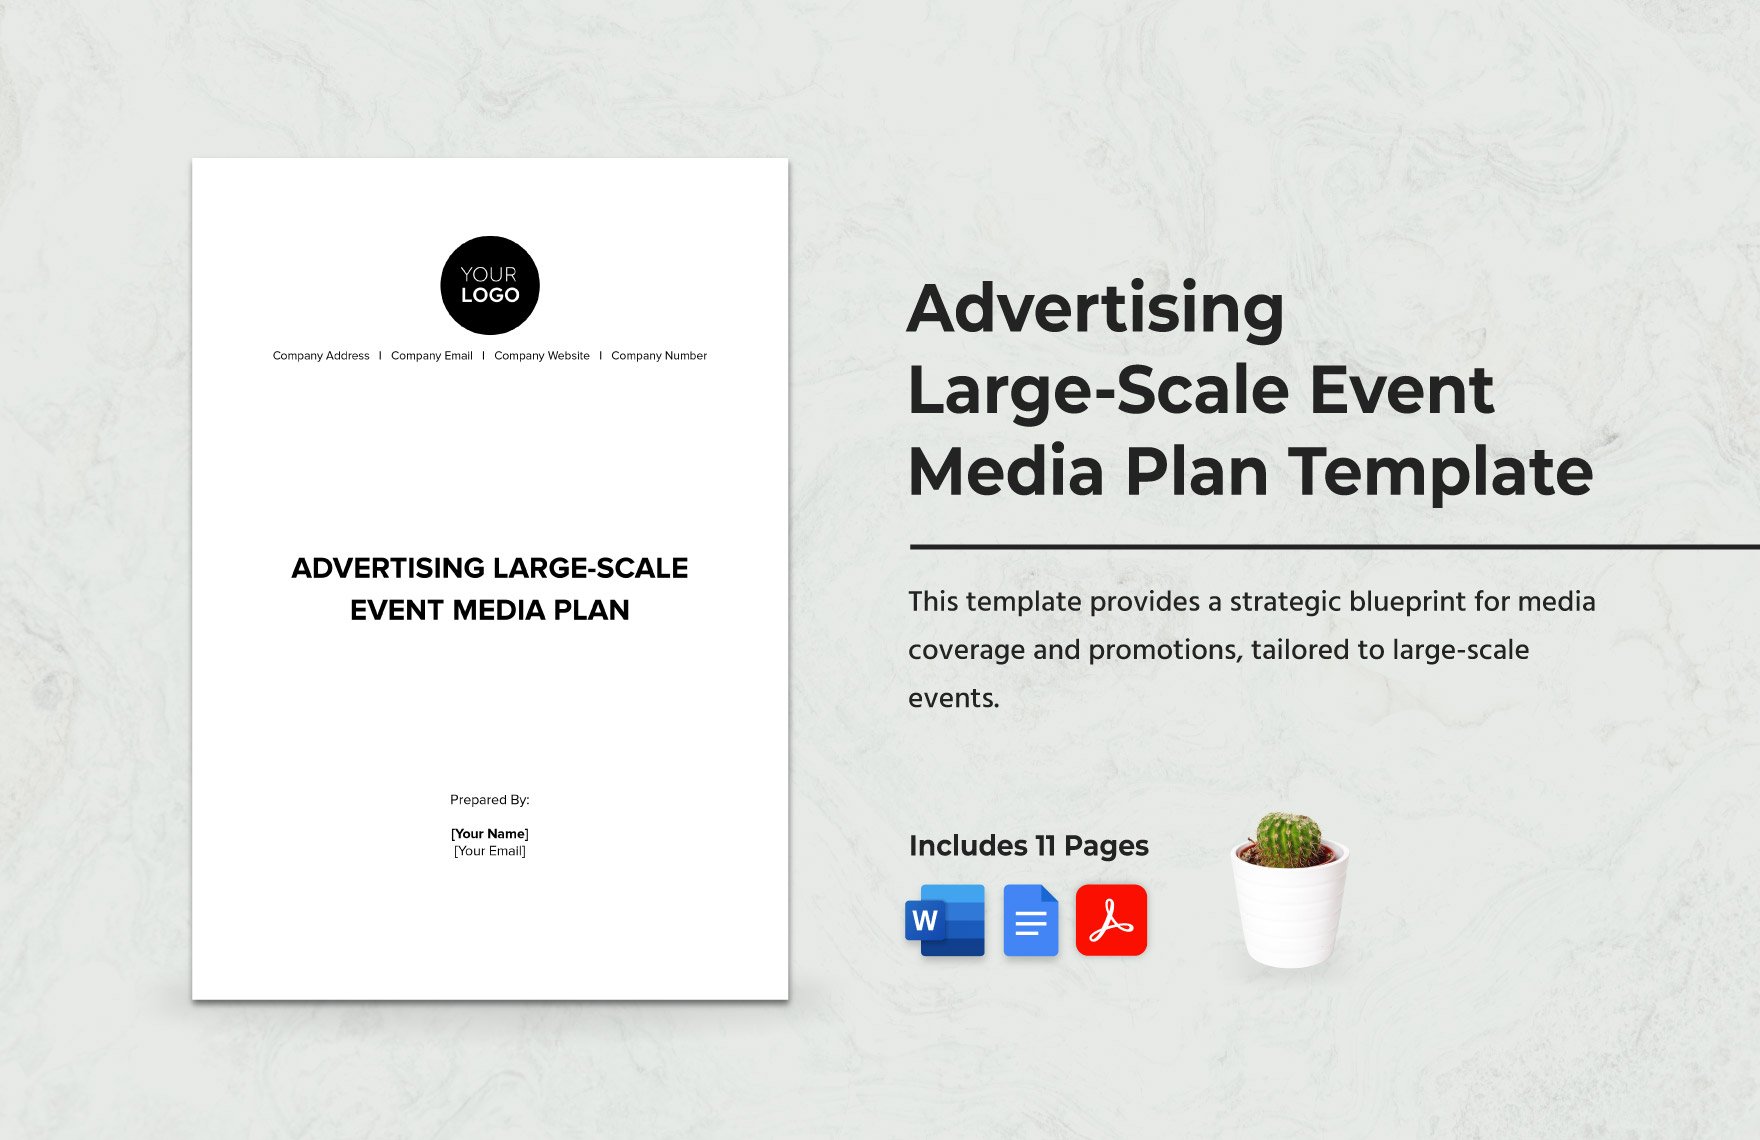 Advertising Large-Scale Event Media Plan Template